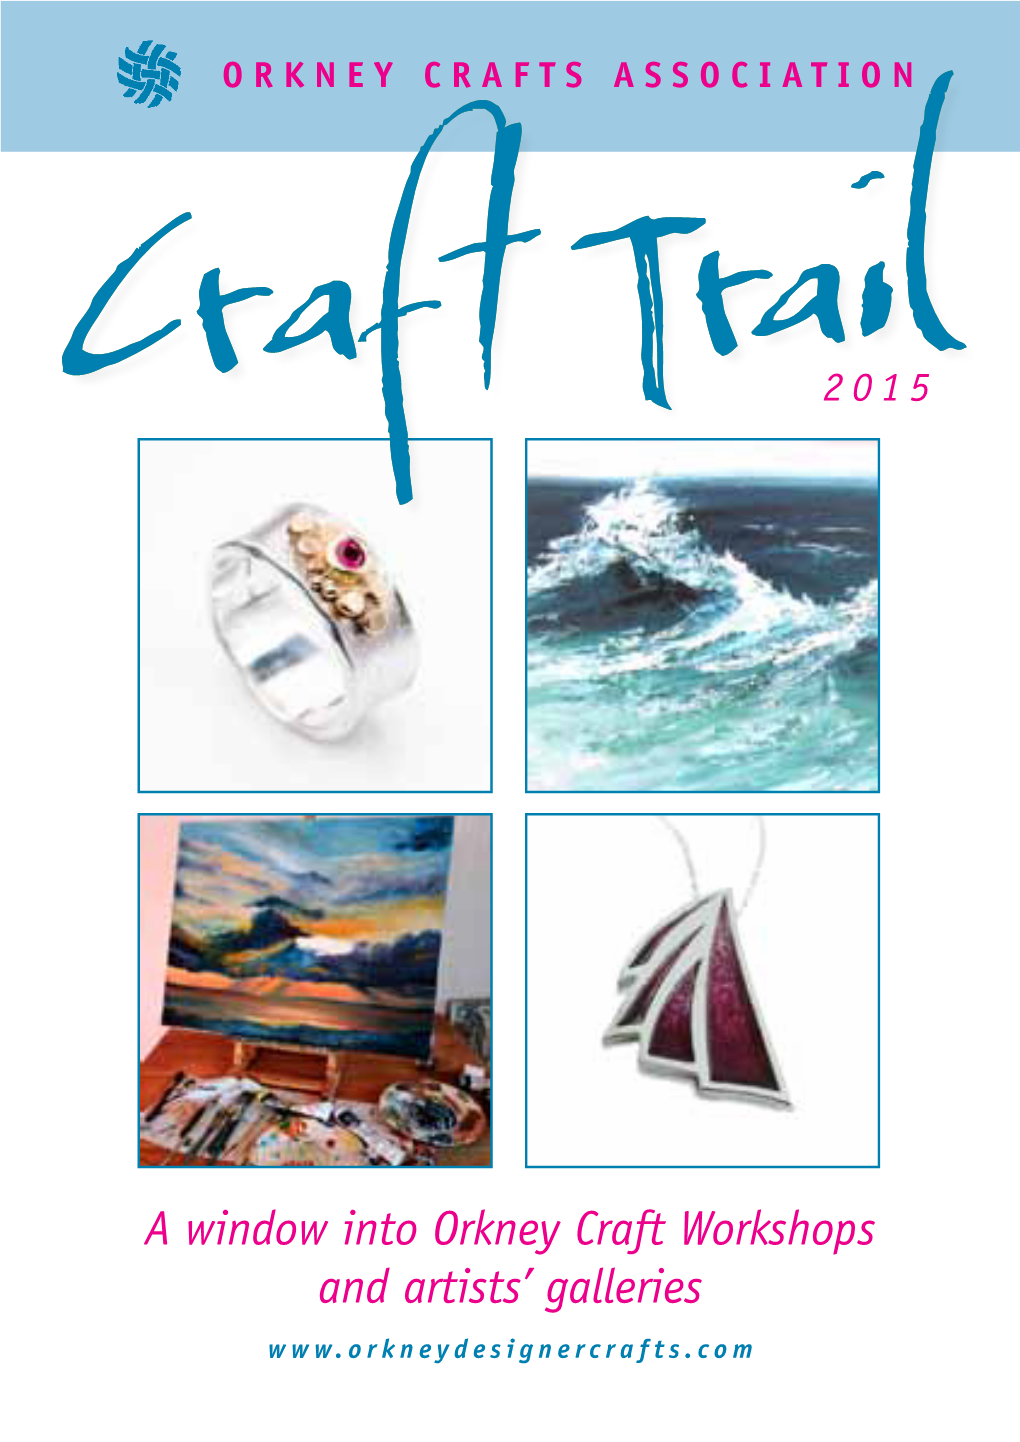 A Window Into Orkney Craft Workshops and Artists' Galleries